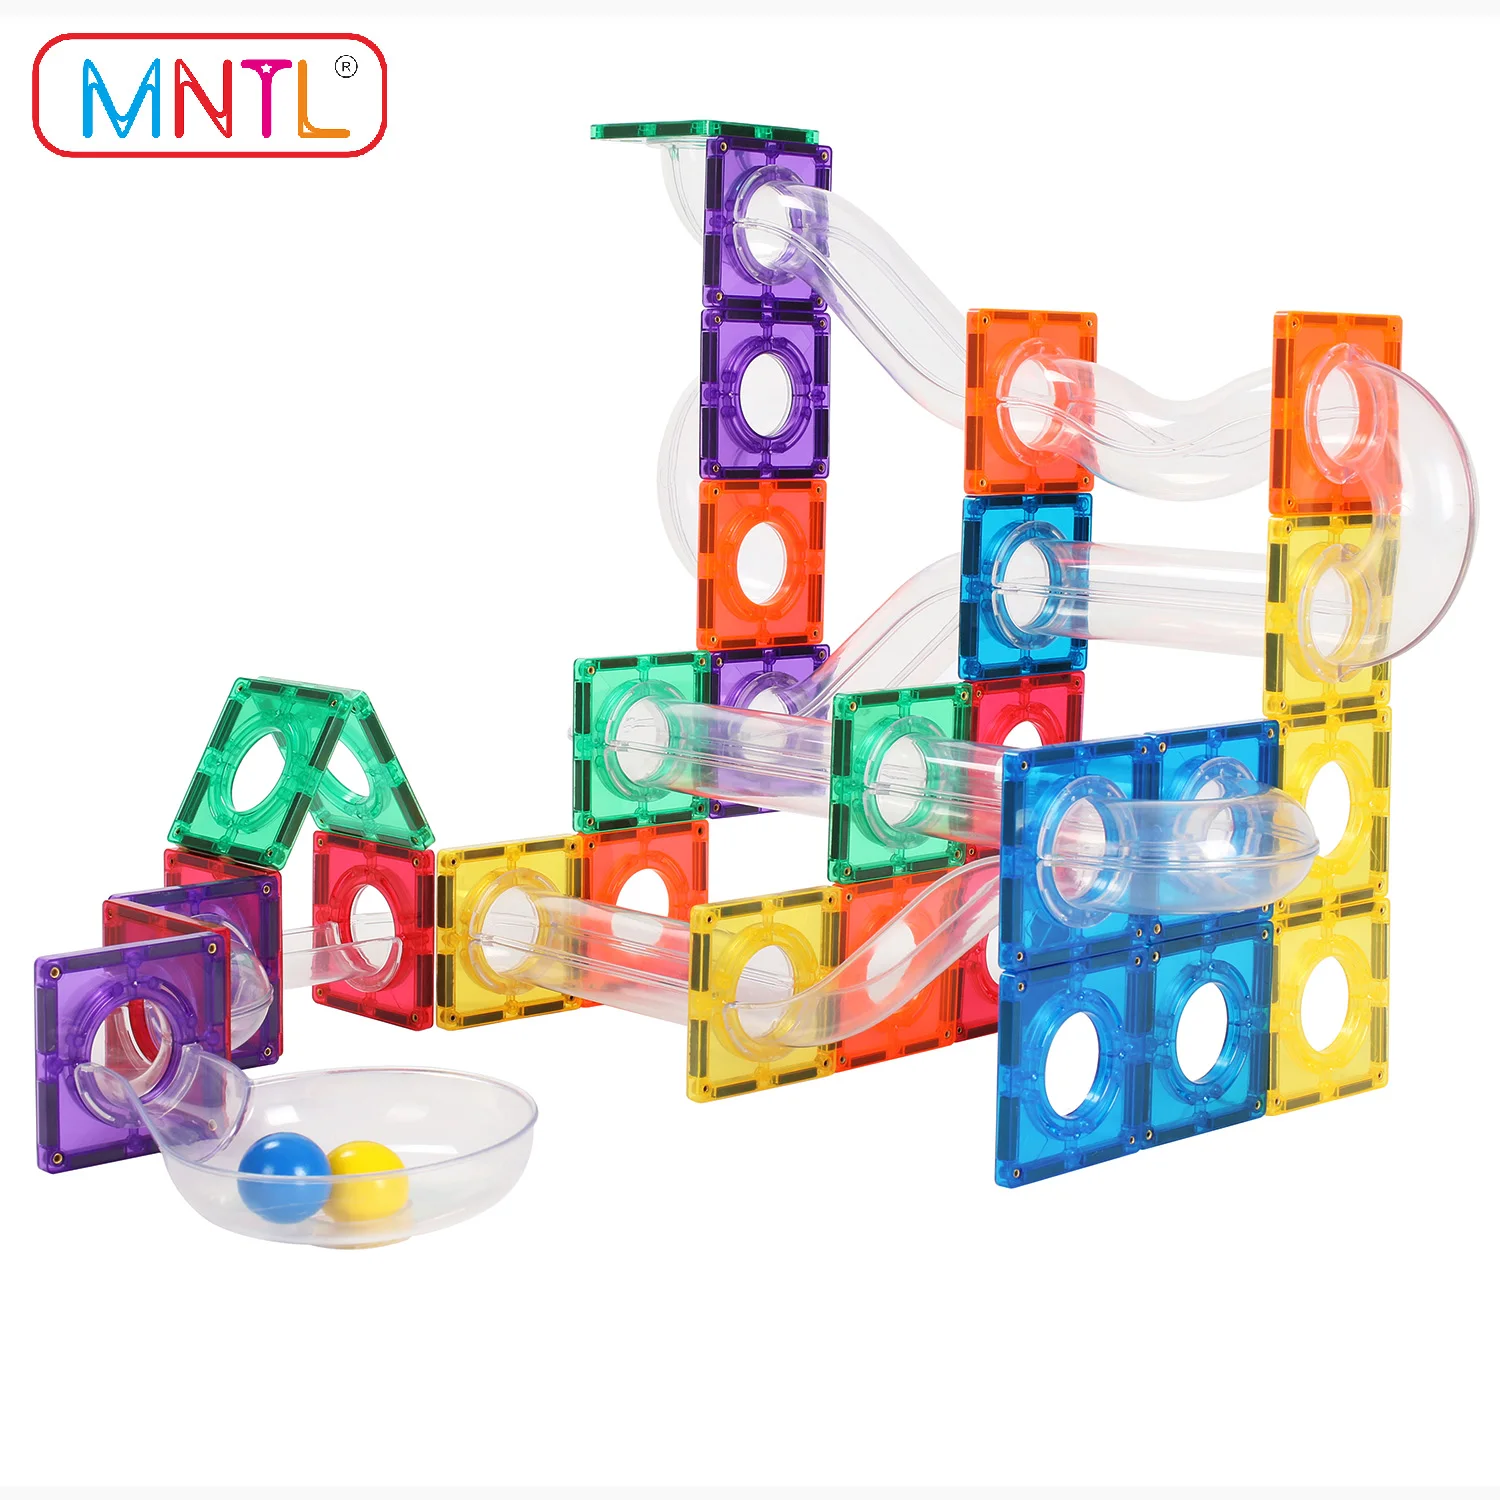 Glowing Magnetic Tiles Building Blocks Marble Run Race Track Super Set -  110 Complete Pieces Glow in the Dark STEM Light Magnetic Building Blocks  and Gravity Maze Games for Toddlers Kids Magnetic